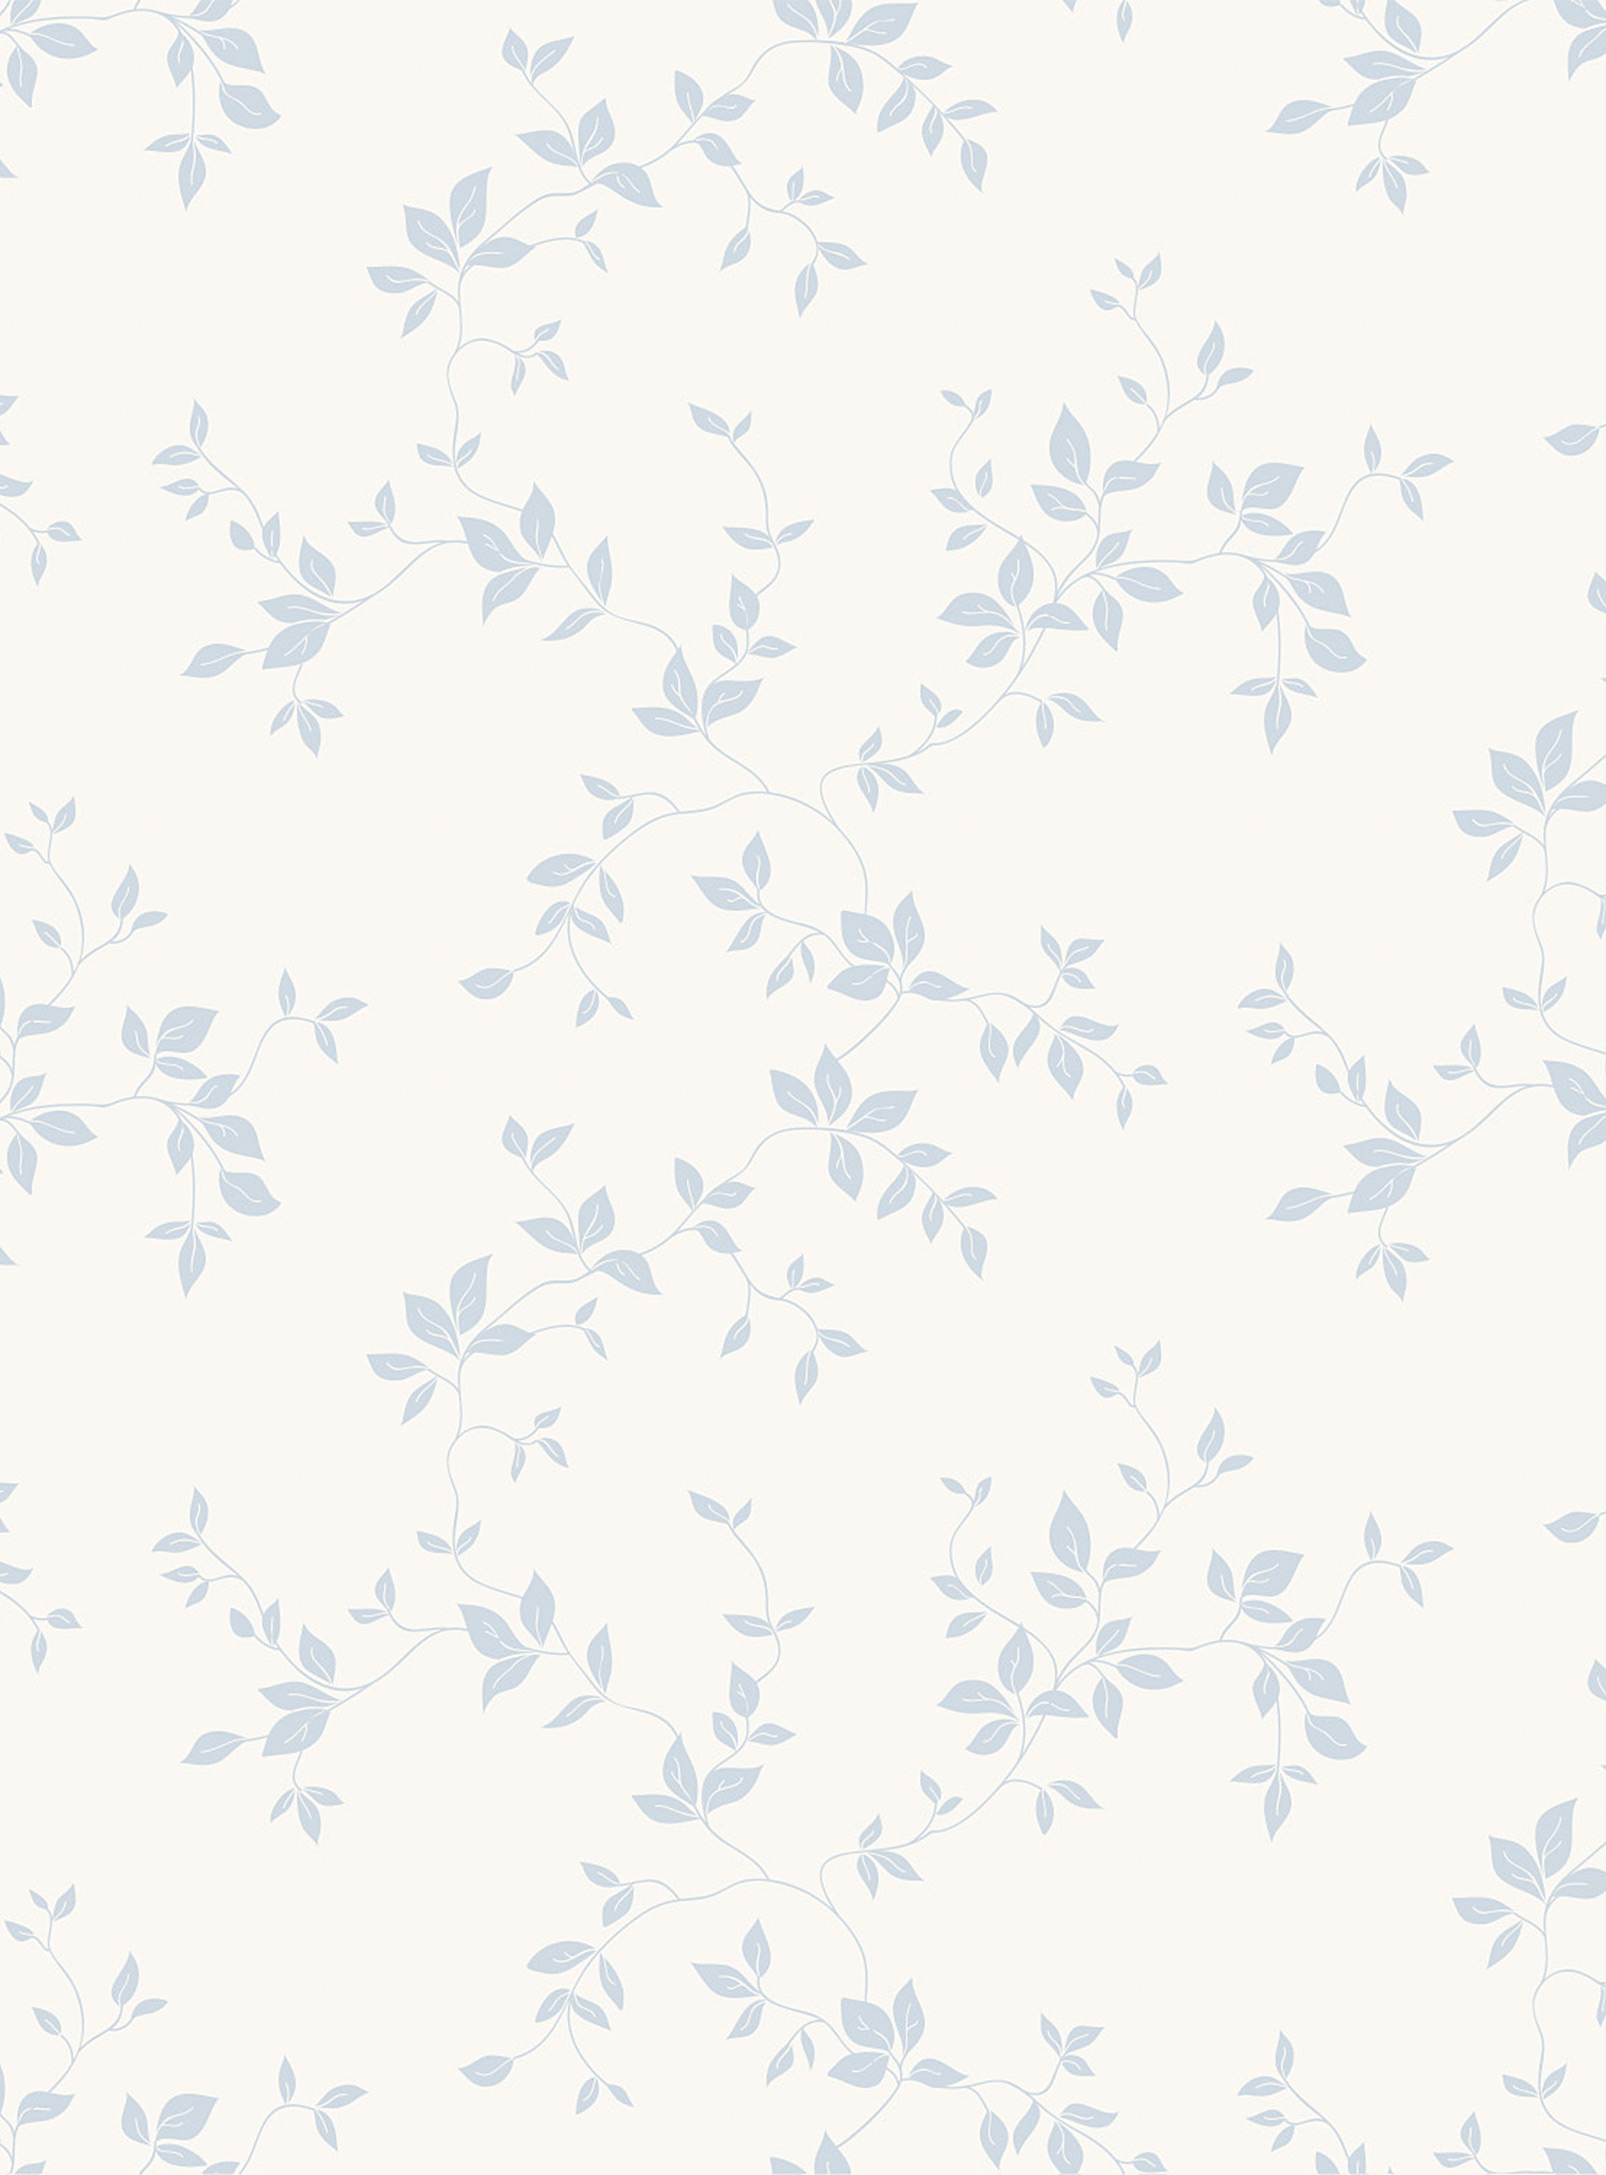 Station D Rosane Flowery Wallpaper Strip See Available Sizes In Baby Blue